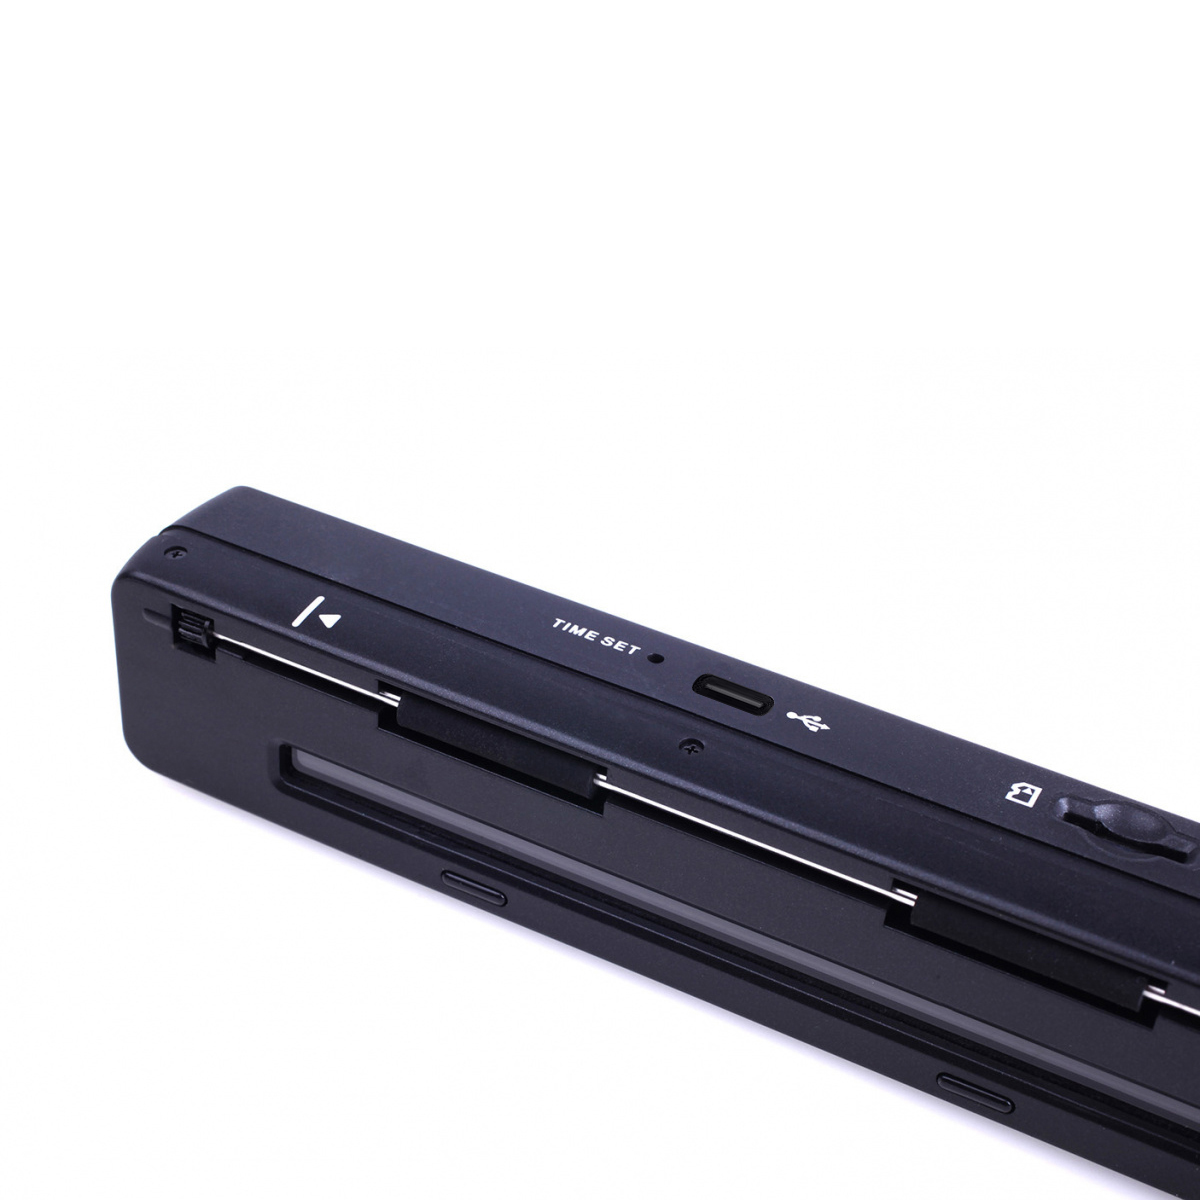 Portable Handheld Scanner for A4 Documents, Photo, Pictures, Receipt -  Scanner Wand for Flat Scanning, UP to 900 DPI